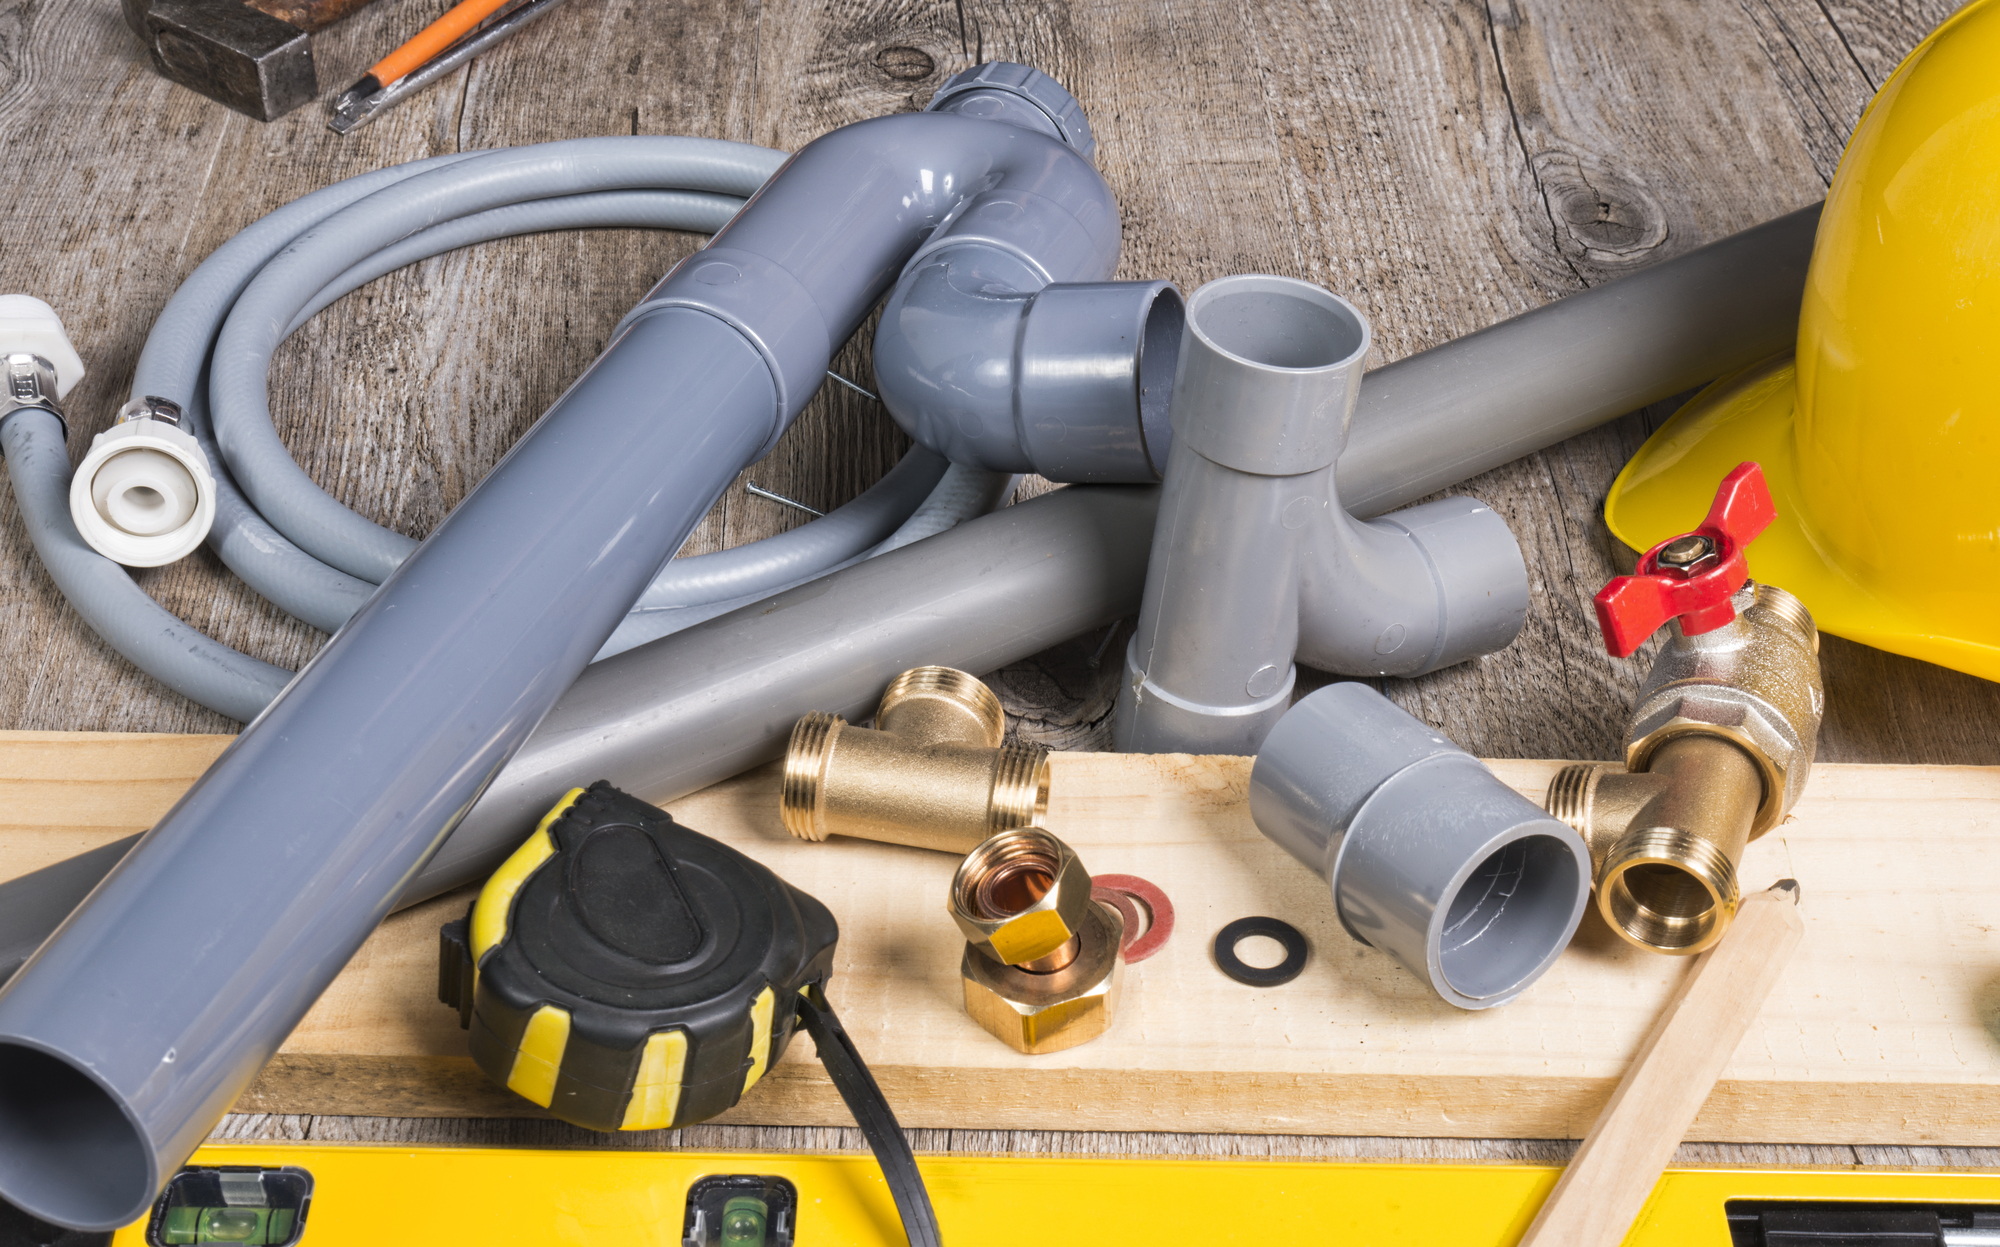 The Top Five Revolutionary Plumbing Products of 2021